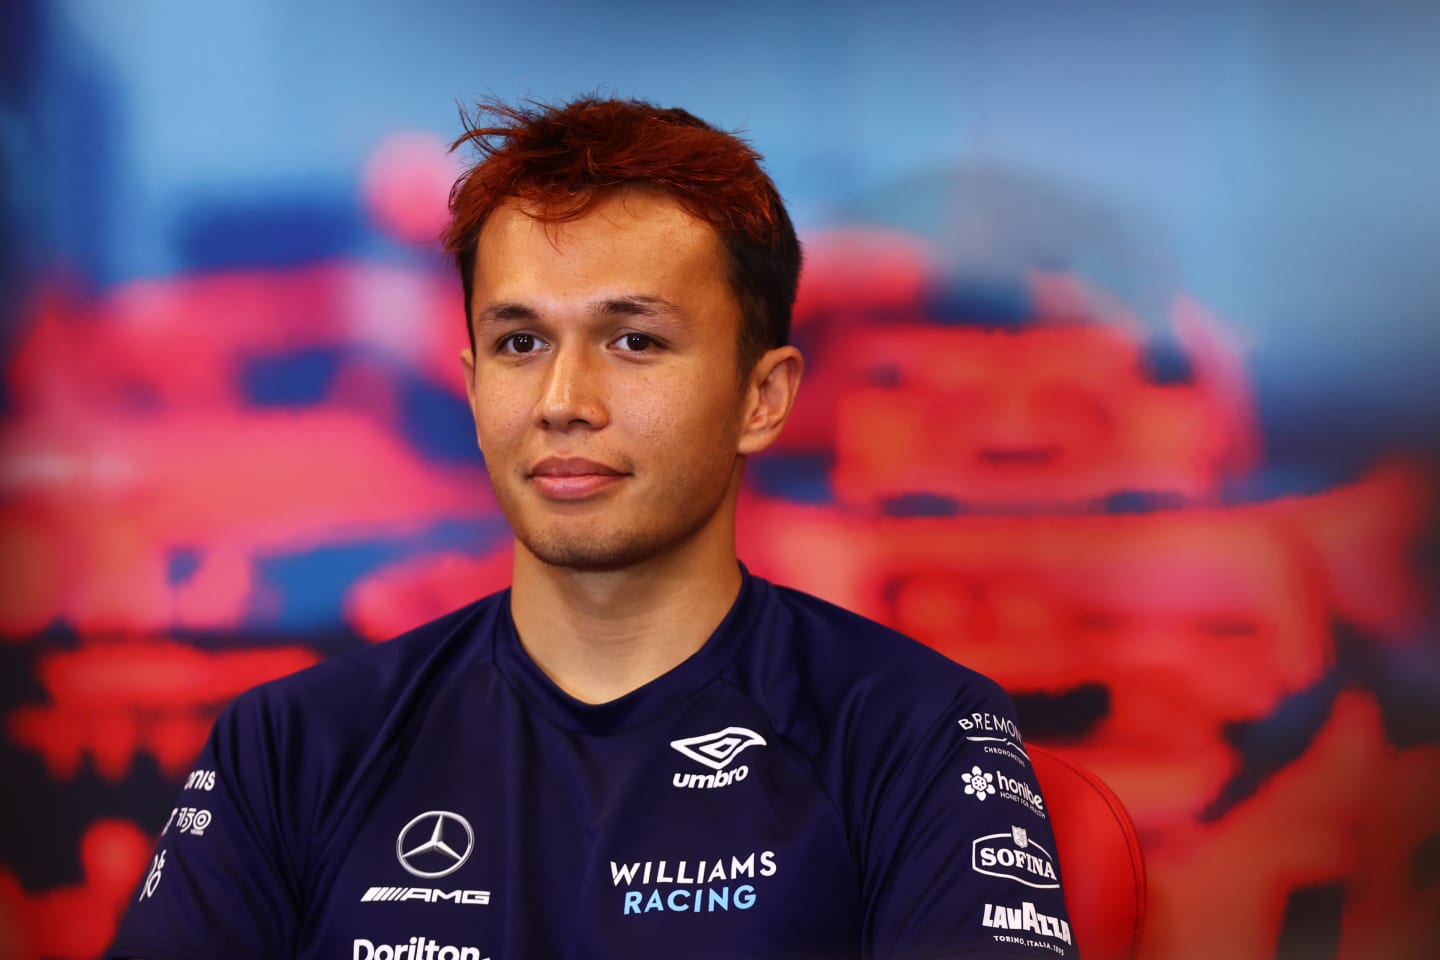 MONTE-CARLO, MONACO - MAY 27: Alexander Albon of Thailand and Williams looks on in the Drivers Press Conference prior to practice ahead of the F1 Grand Prix of Monaco at Circuit de Monaco on May 27, 2022 in Monte-Carlo, Monaco. (Photo by Dan Istitene/Getty Images)